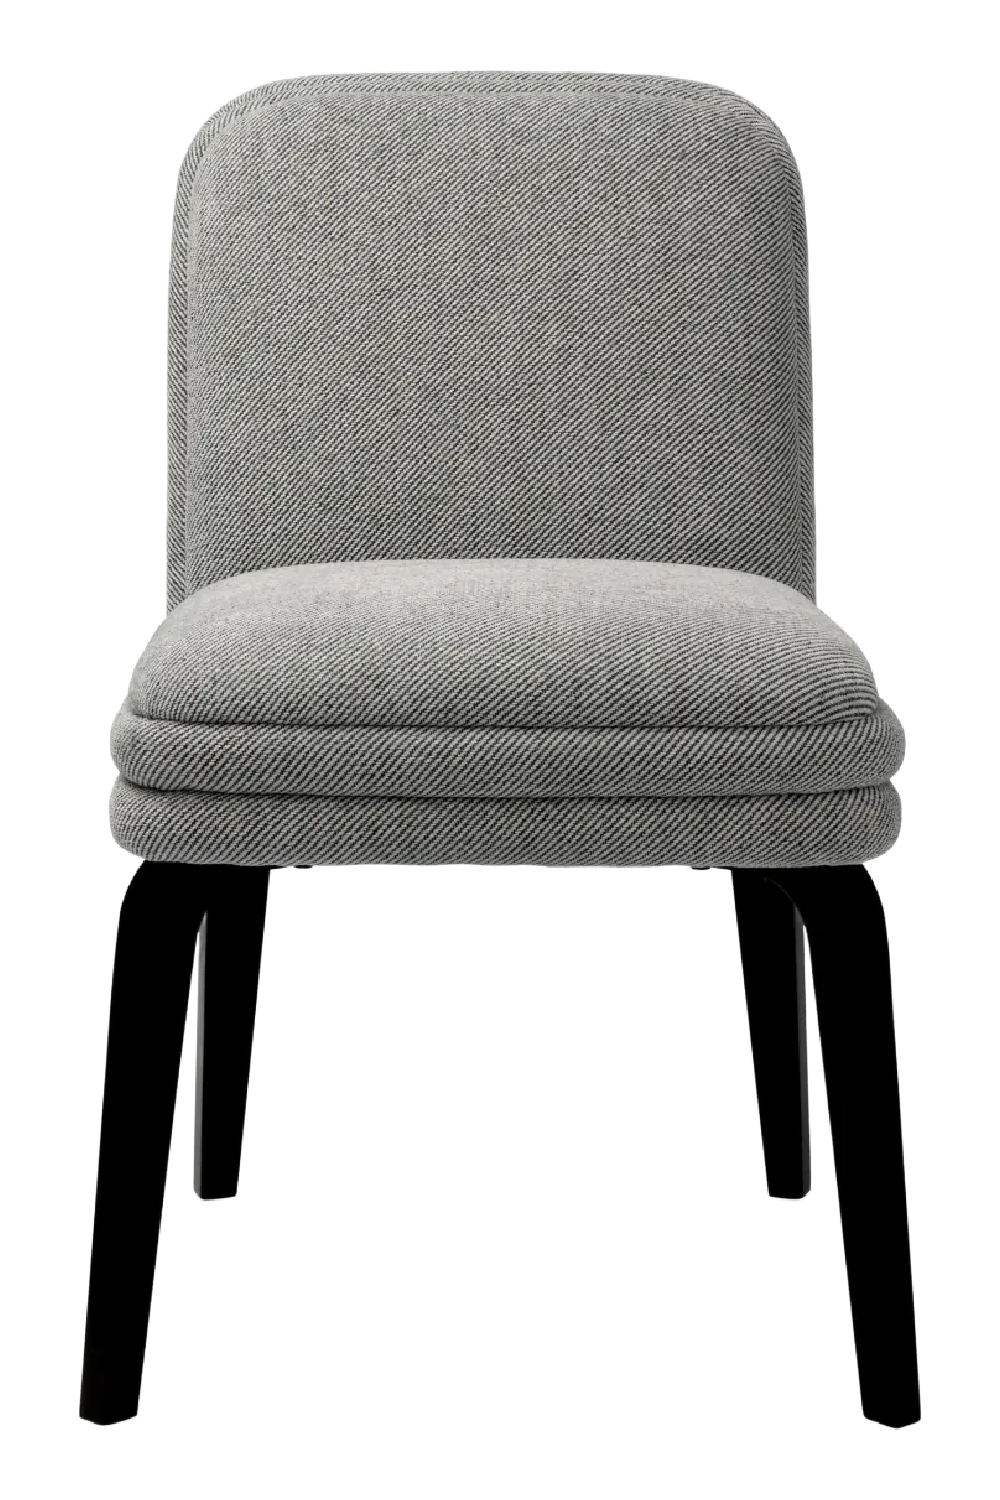 Gray Upholstered Dining Chair | Eichholtz Lucia | Oroa.com